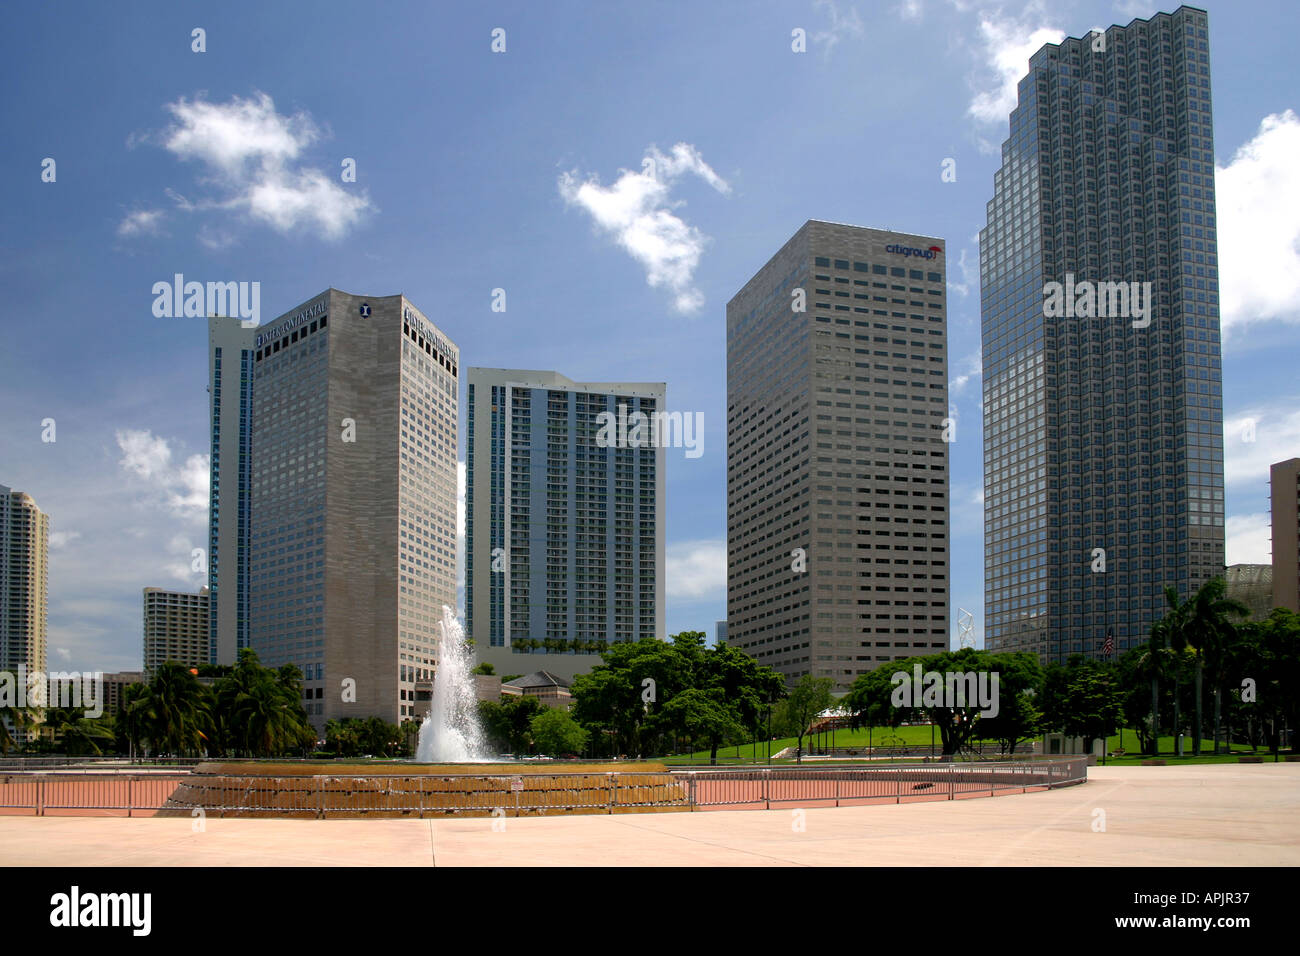 Beside the Port of Miami overlooking the Downtown Bayside area Florida United States of America Stock Photo